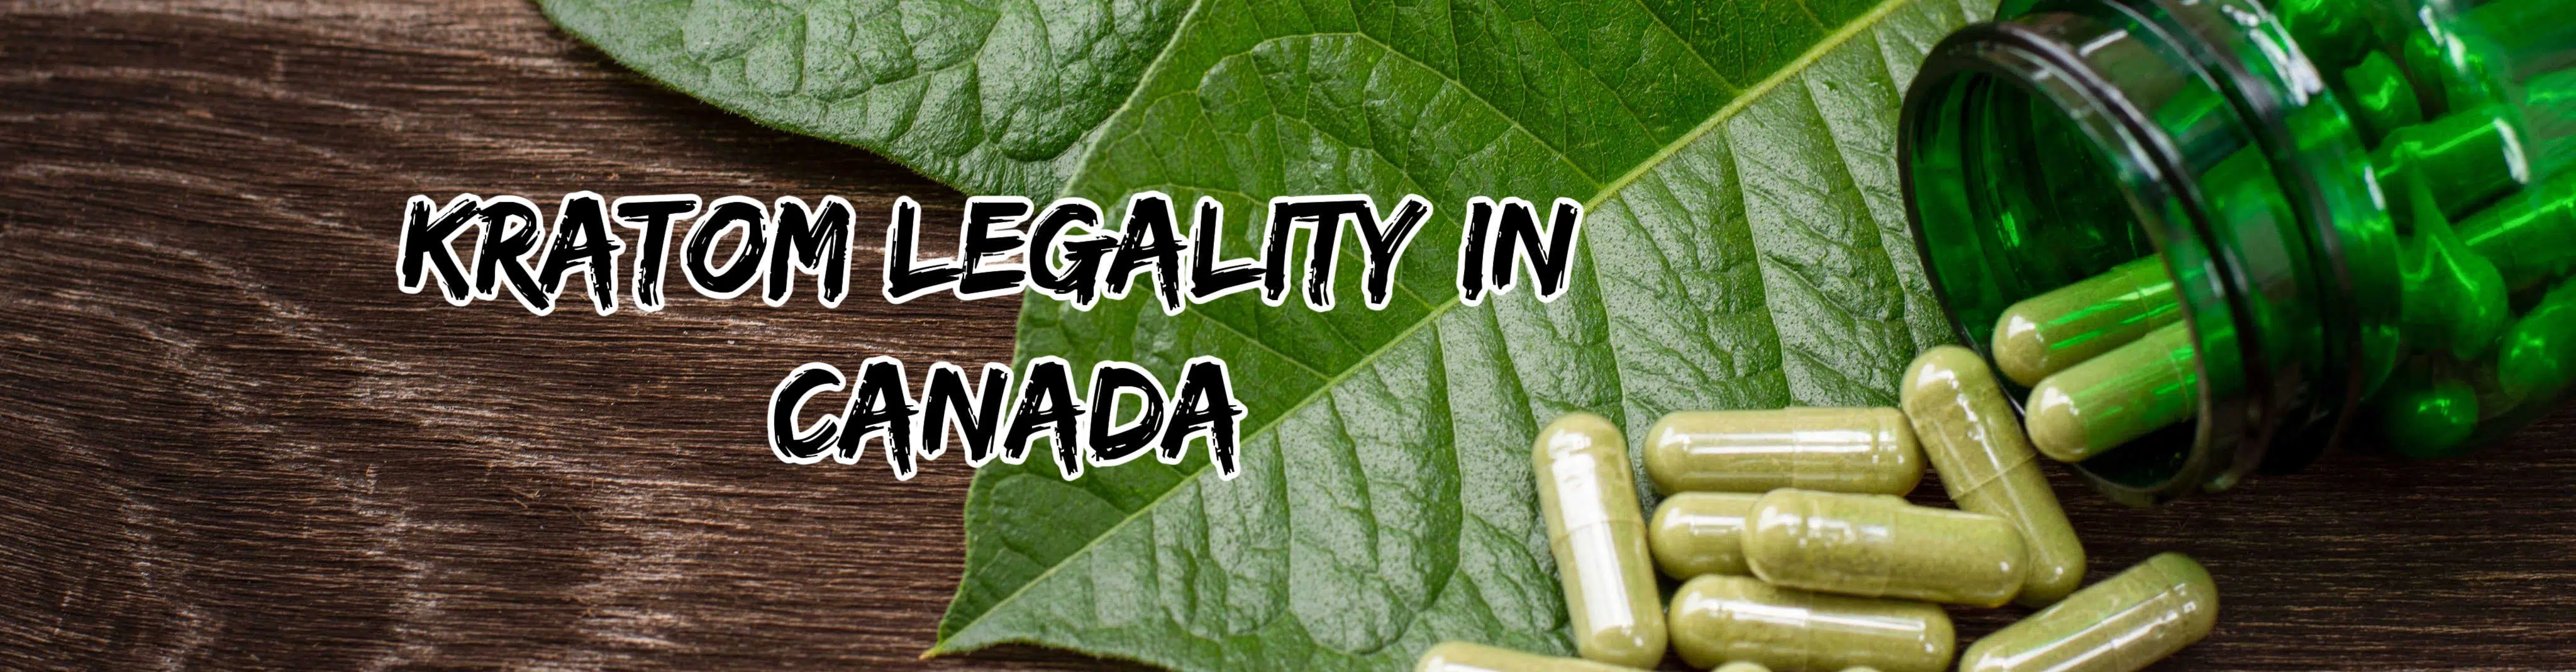 image of kratom legality in canada